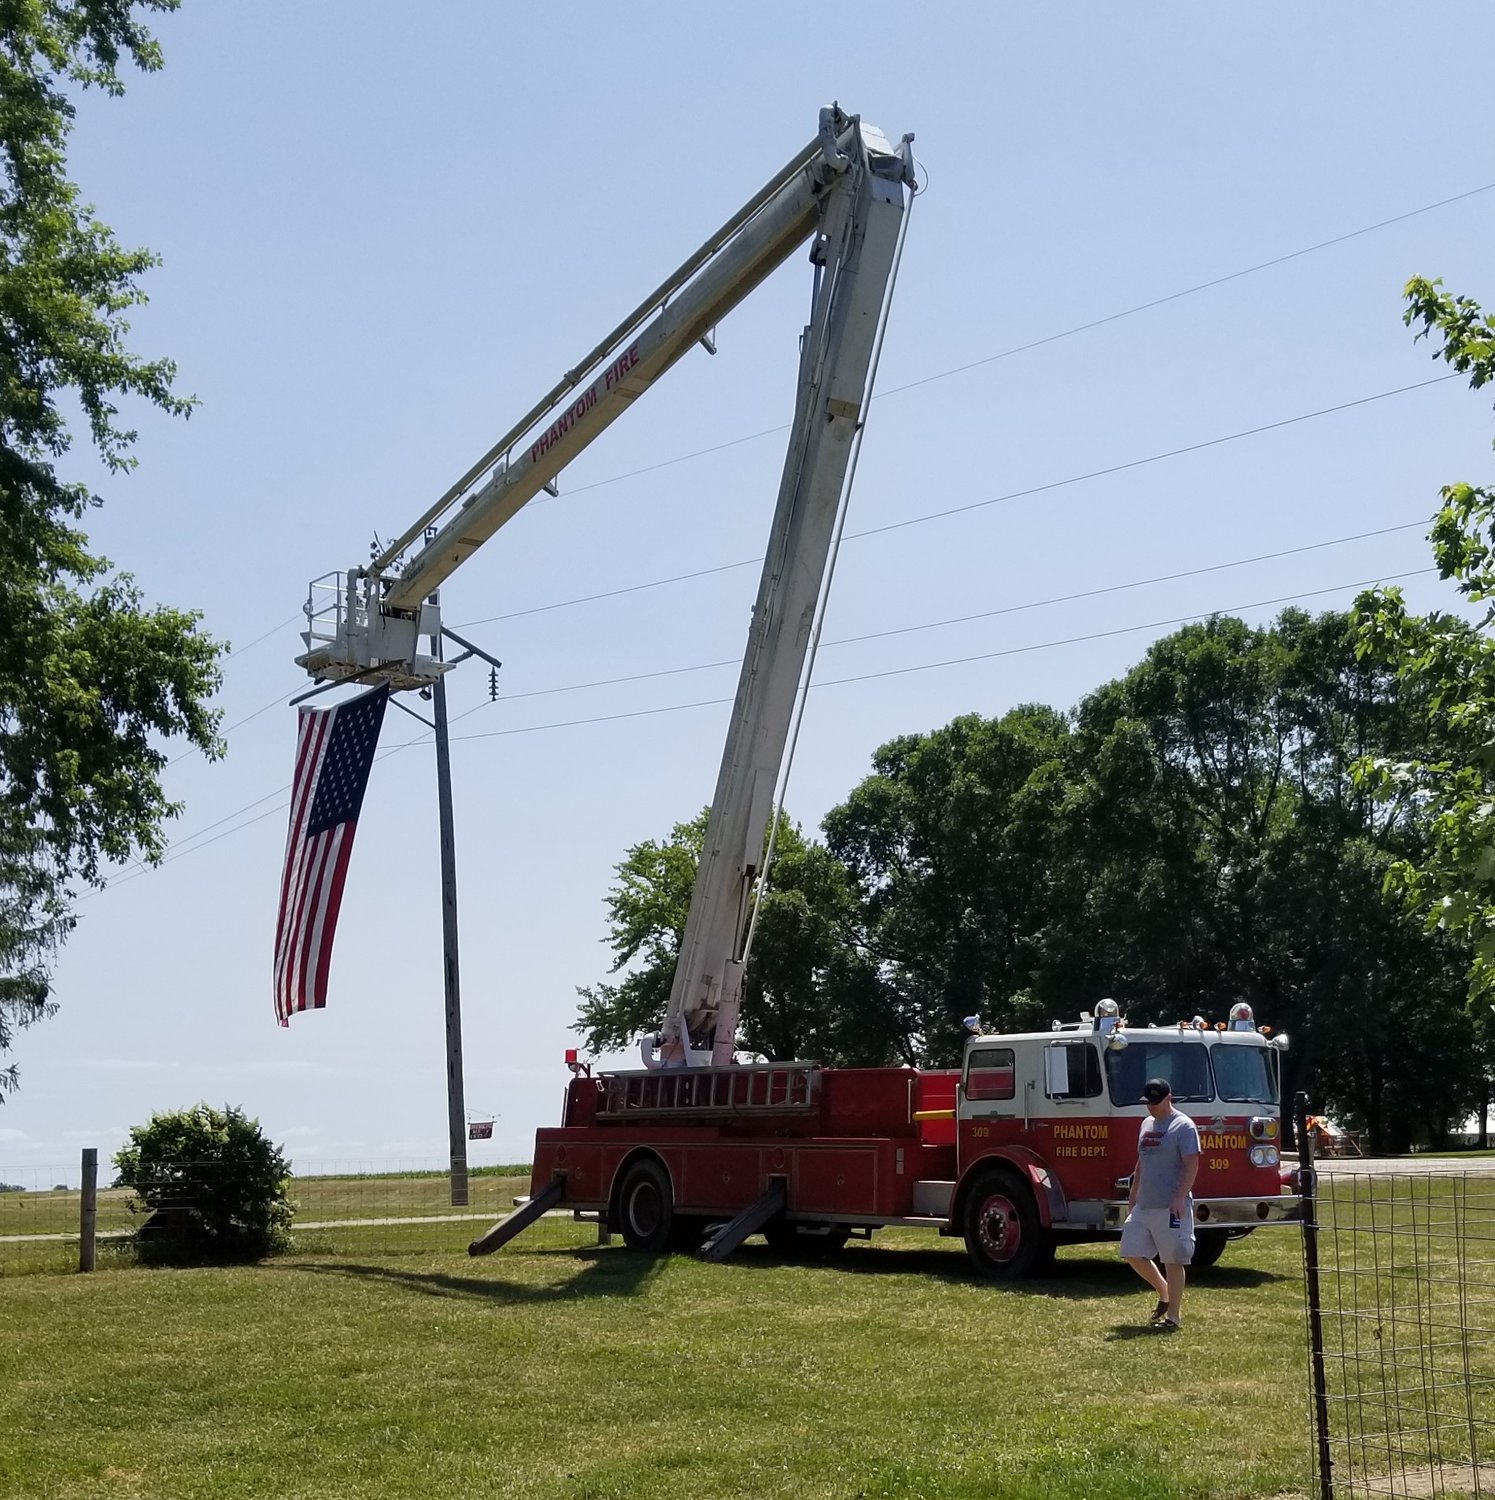 A giant flag hung from the Phantom 309 fire engine welcomed Clam-Fest guests to the Hilbert Strusz farm West of Goodhue on July 30th and 31st.